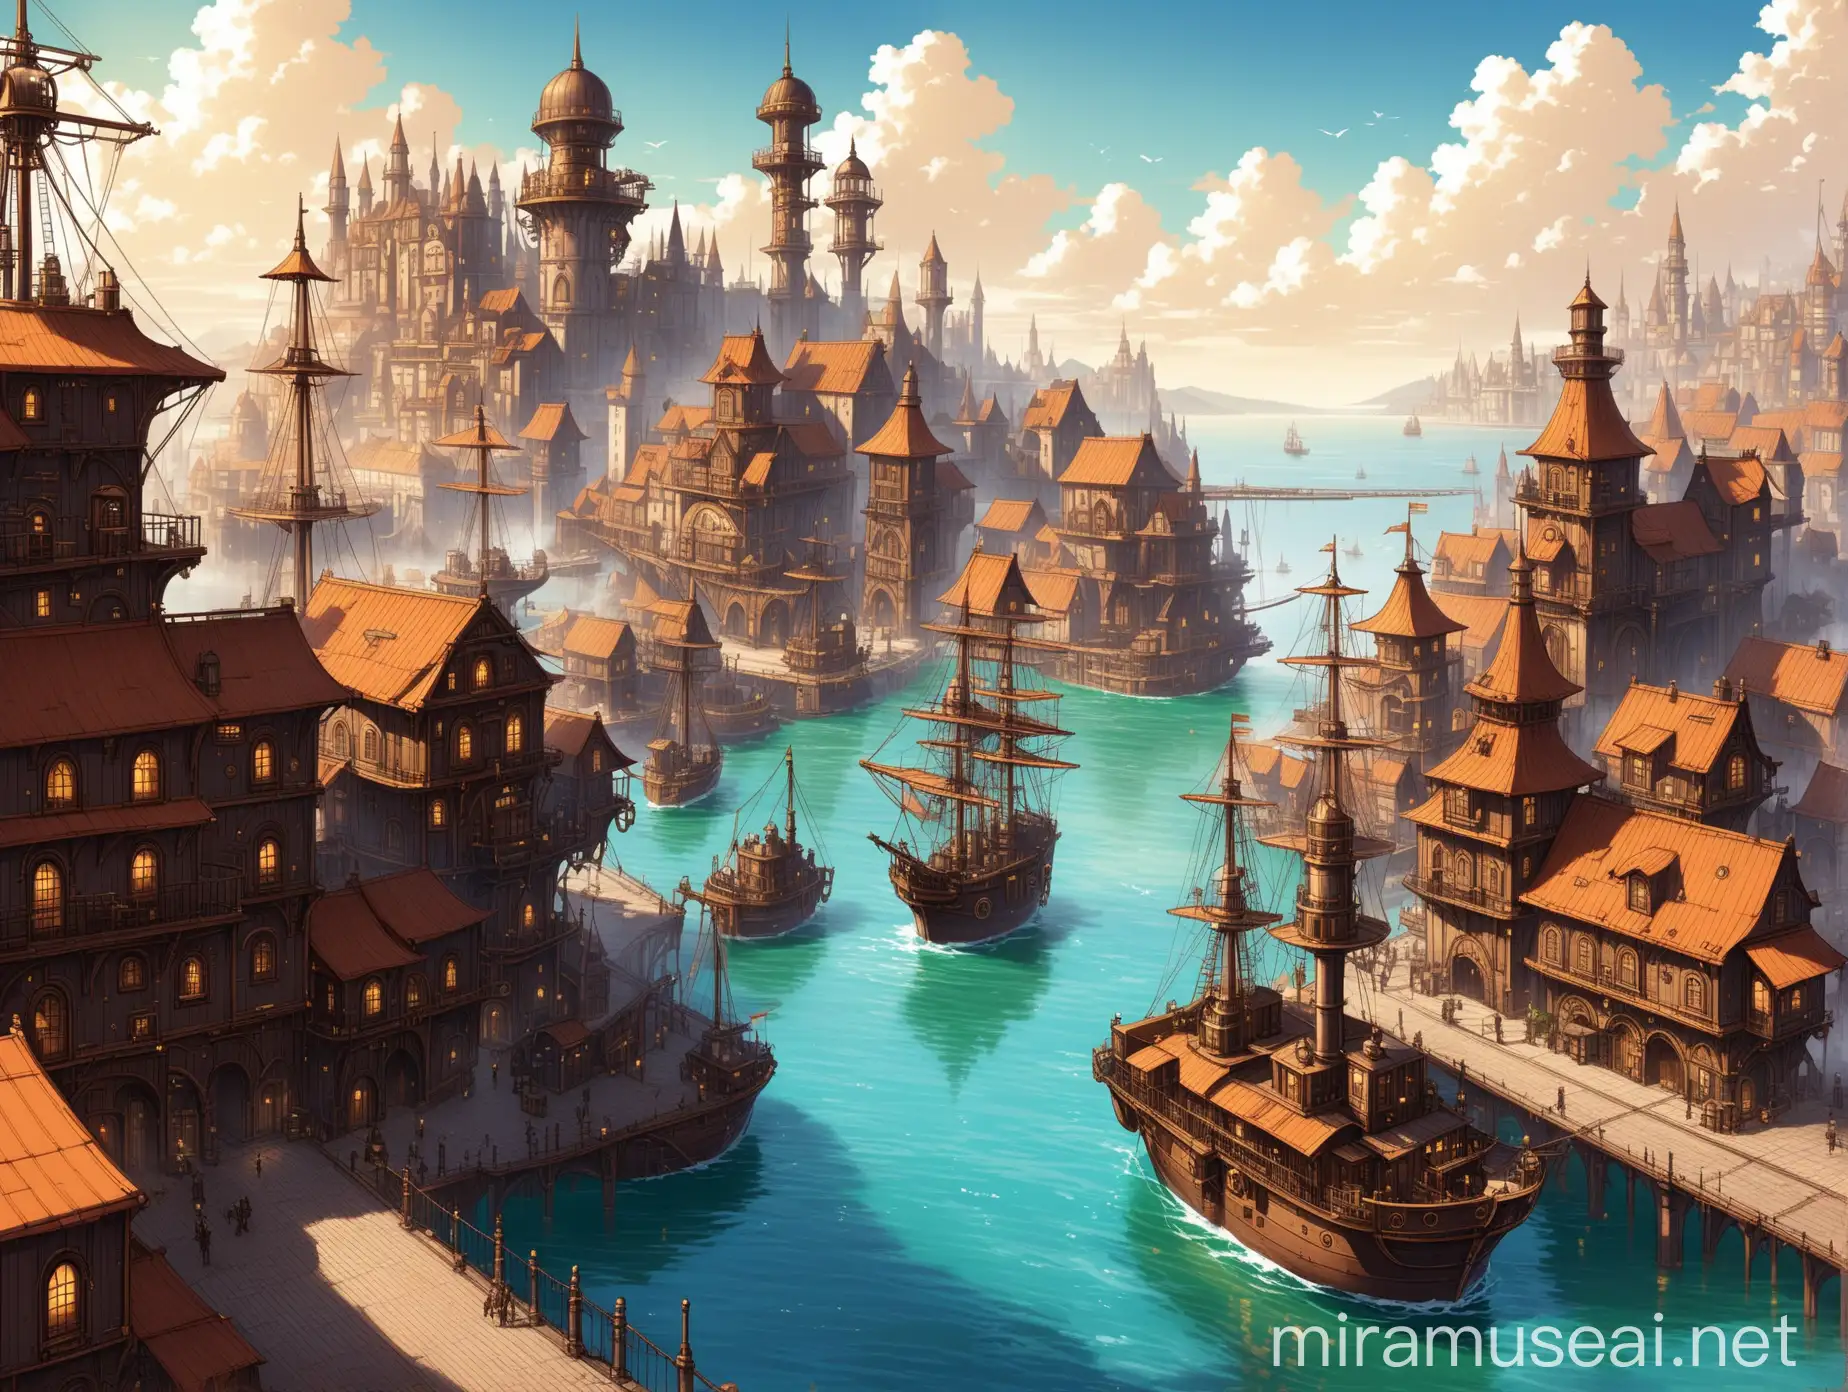 Steampunk Port City Fantasy Scene with Airships and Clockwork Contraptions